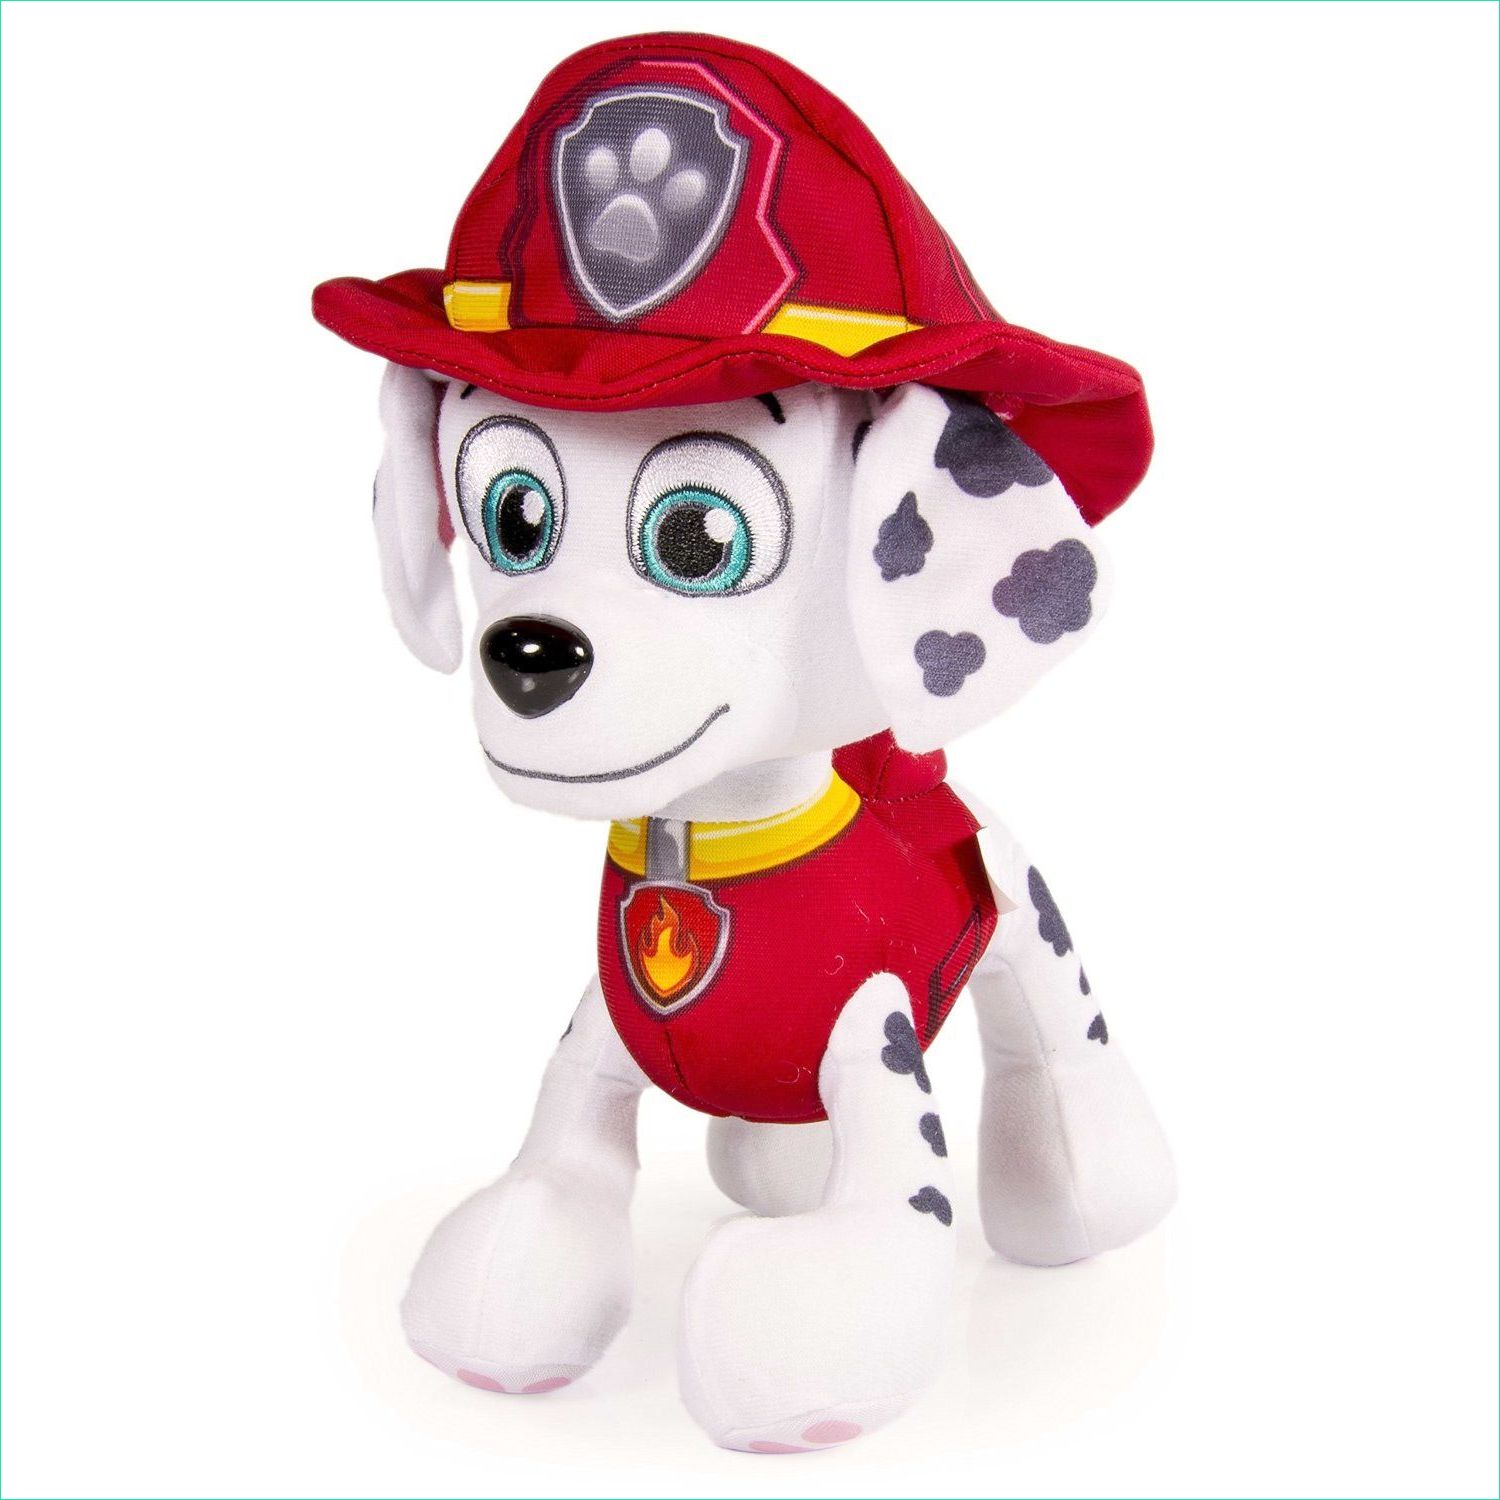 Personnage Paw Patrol Cool Stock Spin Master Peluche Pat Patrouille Paw Patrol Marcus 25 Cm Pas